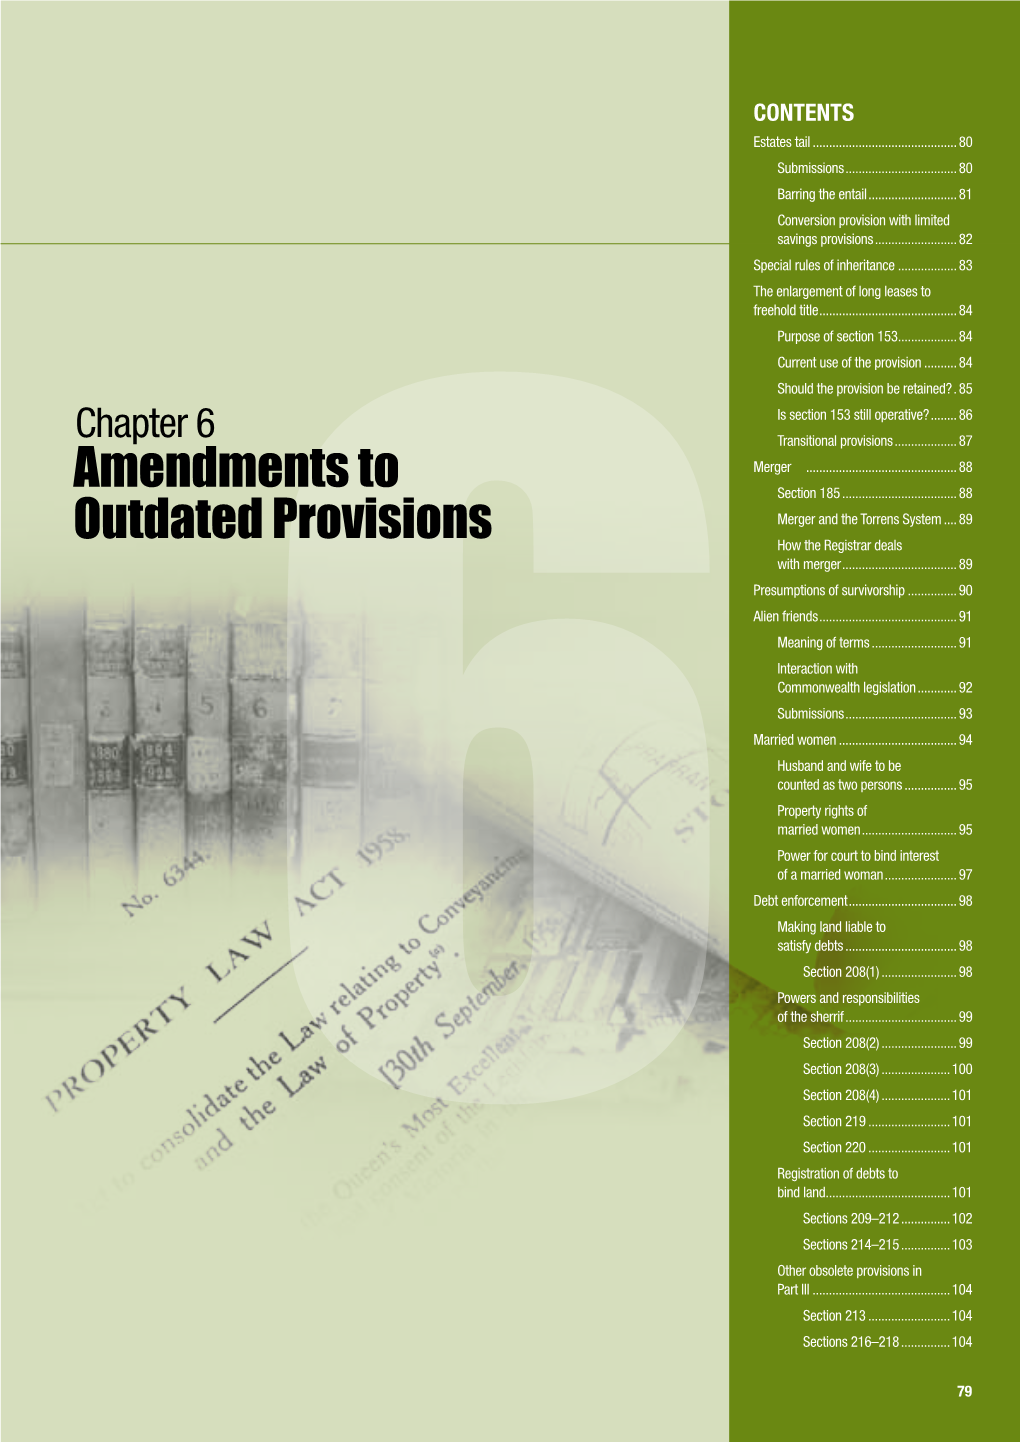 Amendments to Outdated Provisions